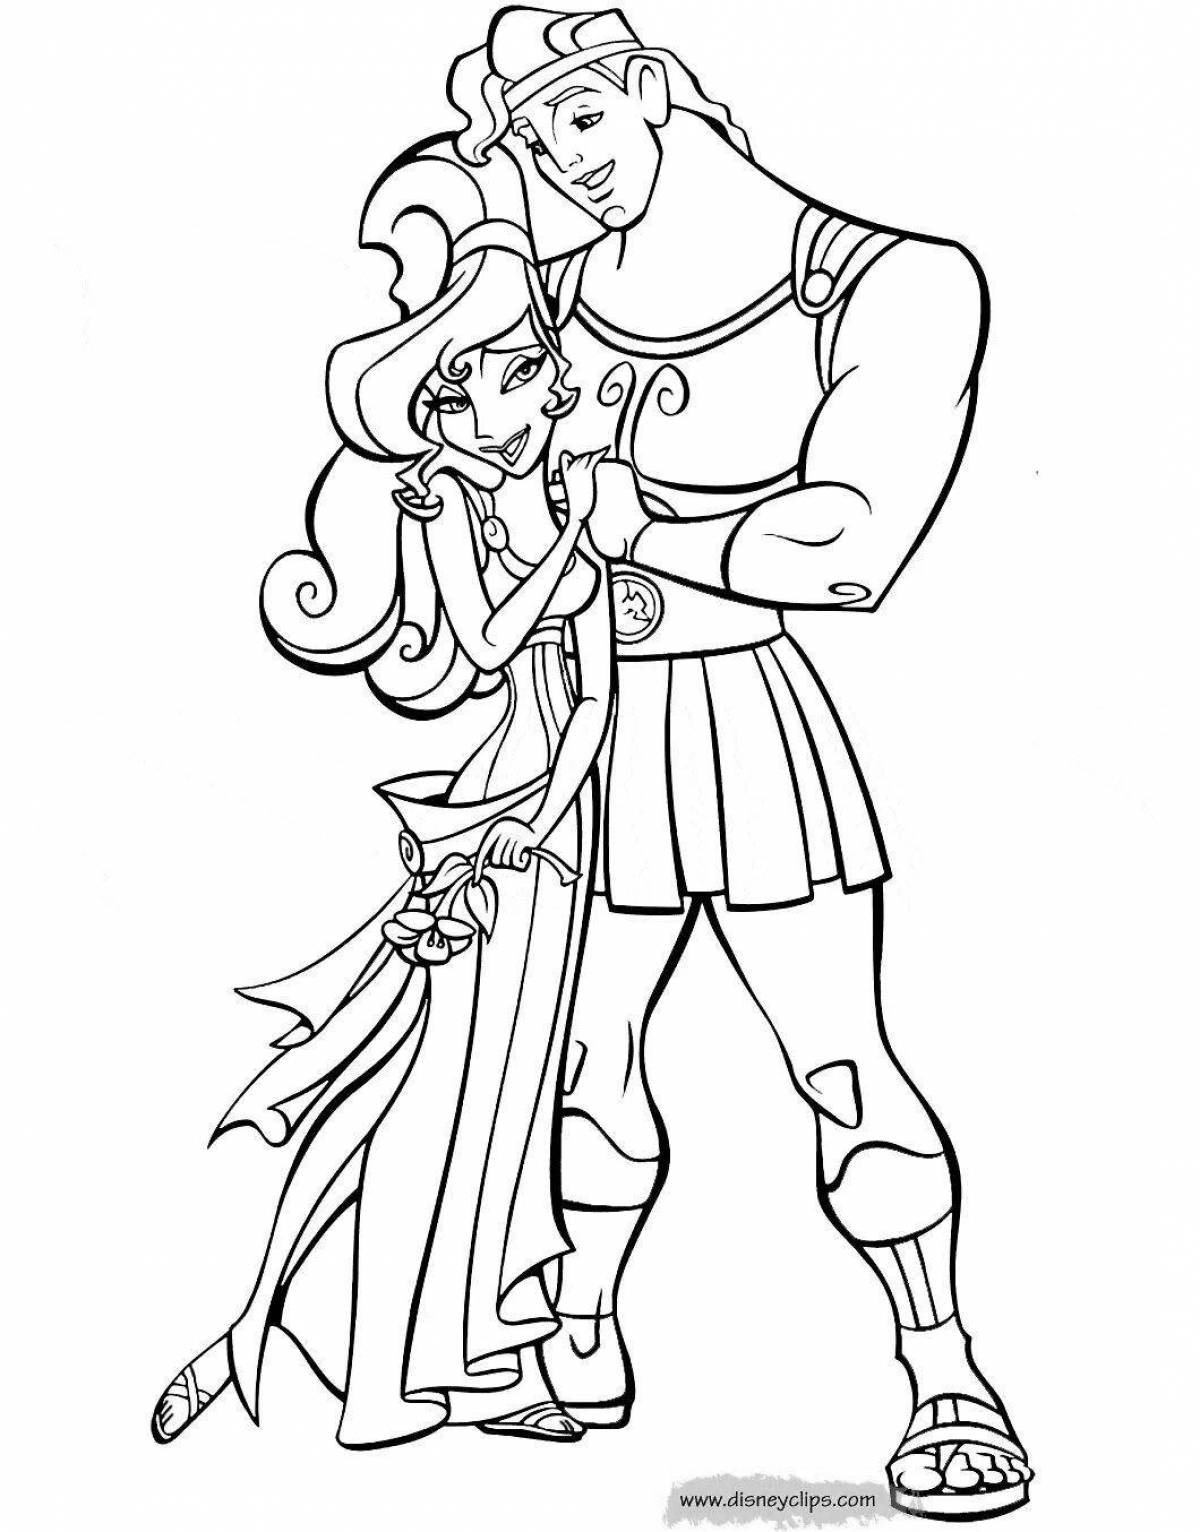 Colorful hercules coloring page